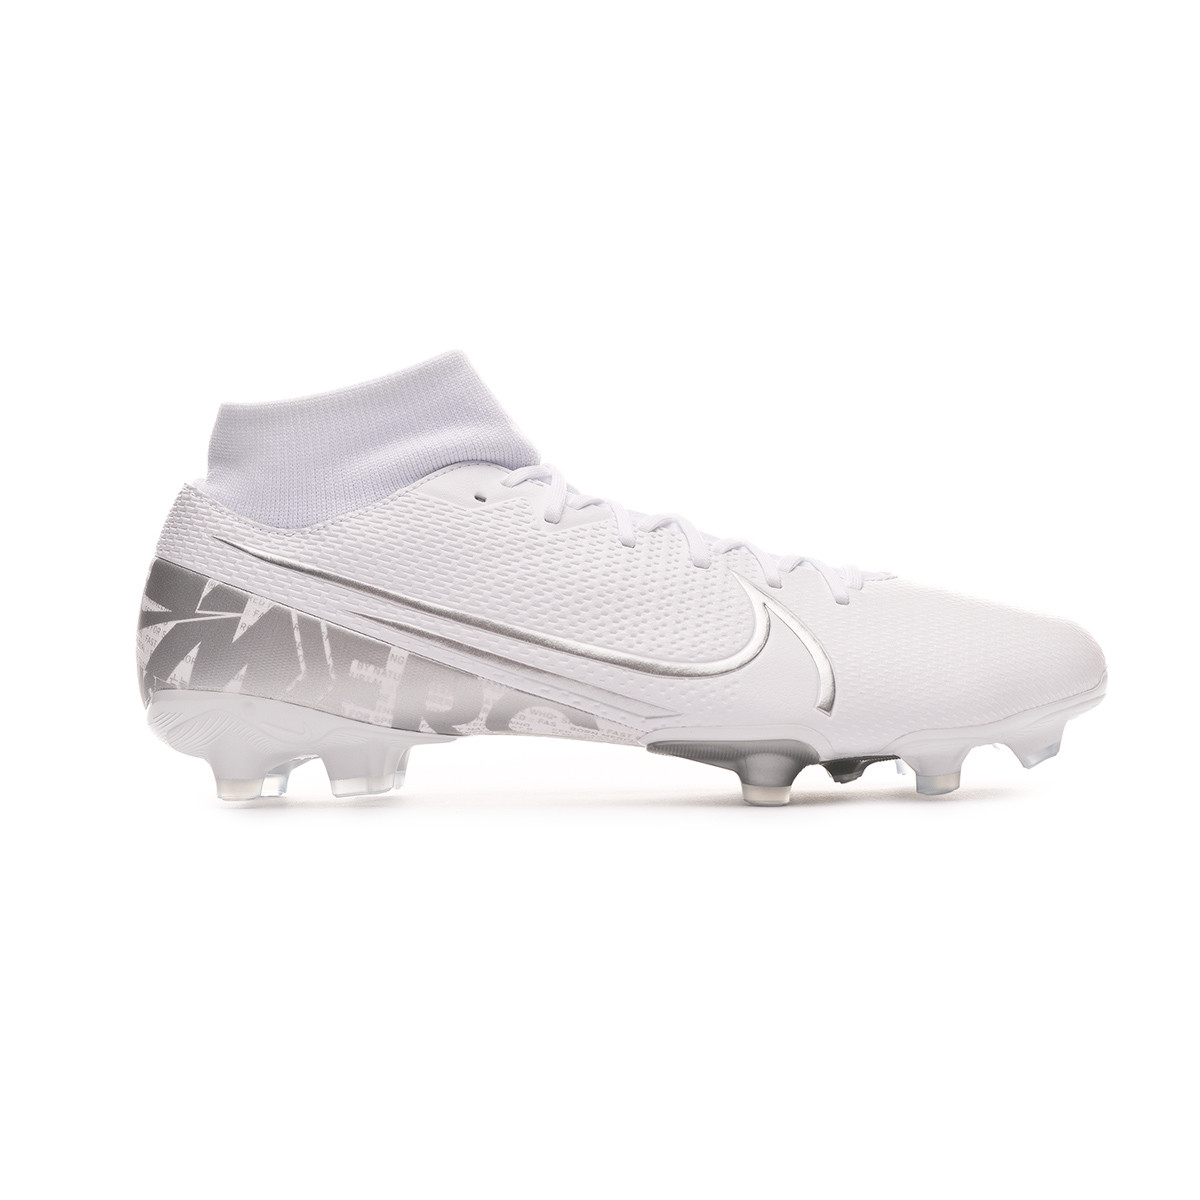 nike mercurial superfly vii academy football boots